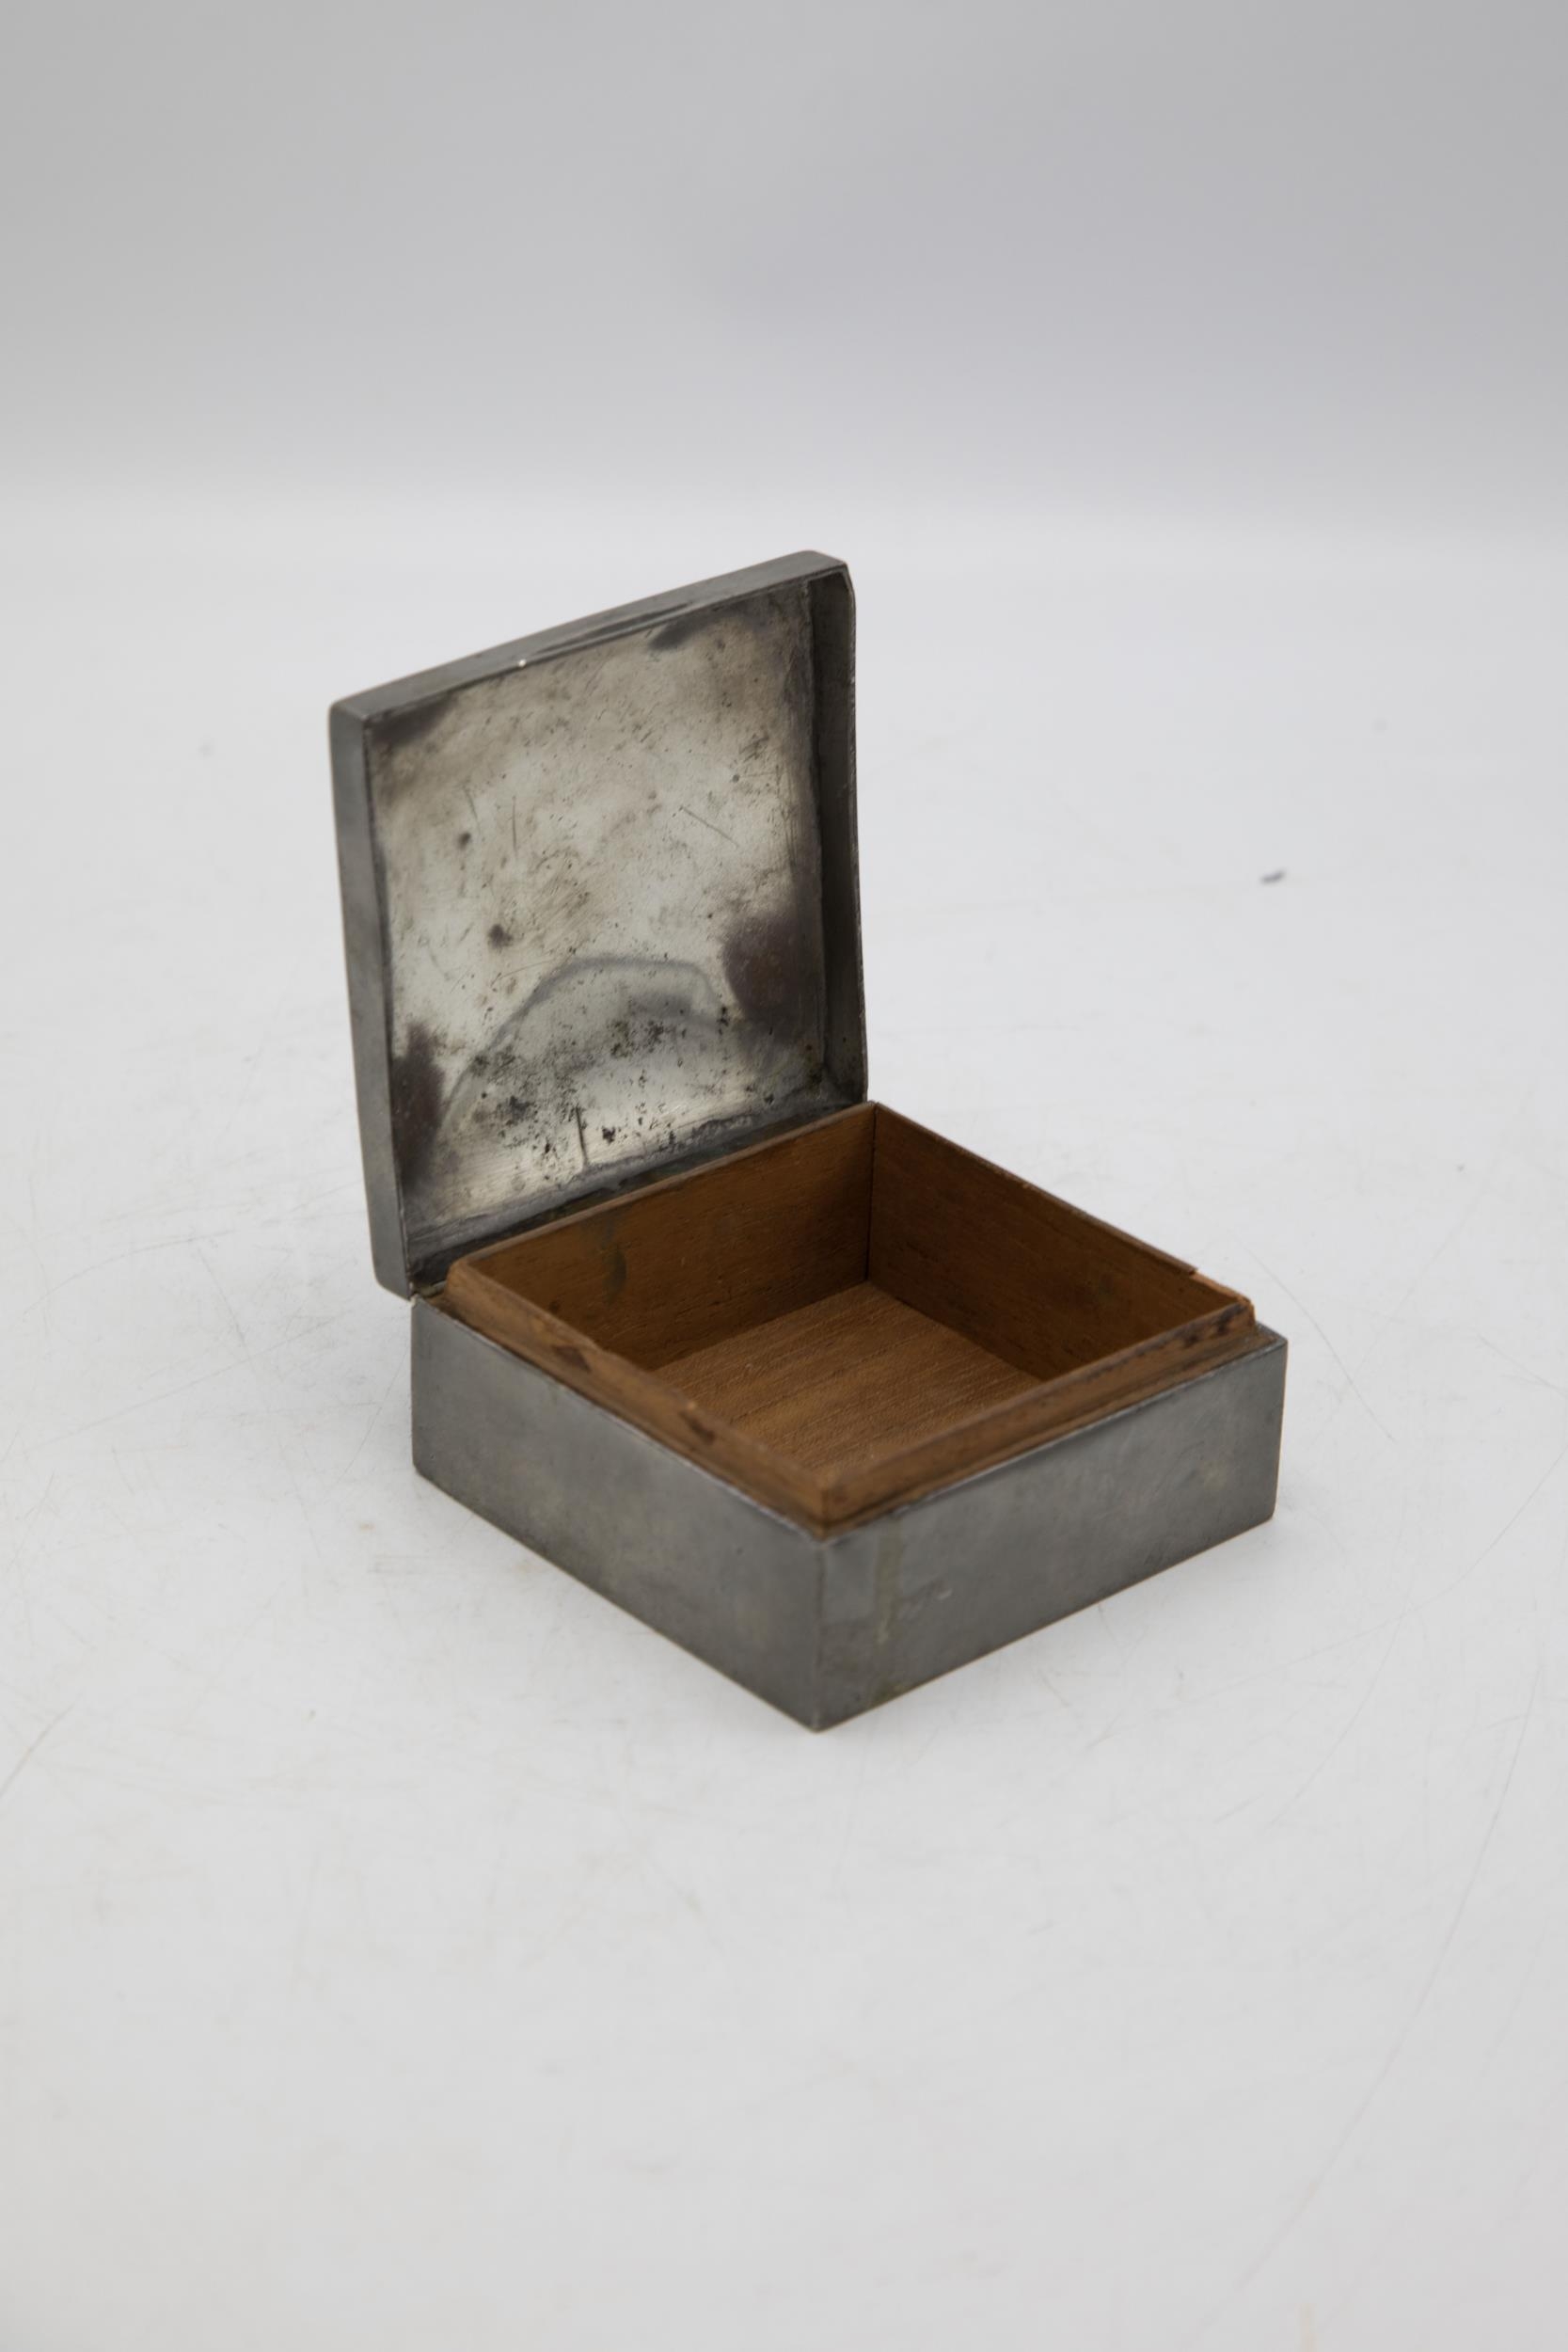 Archibald Knox for Liberty & Co of London - Tudric pewter cigarette box, cedar lined interior, 5cm - Image 2 of 2